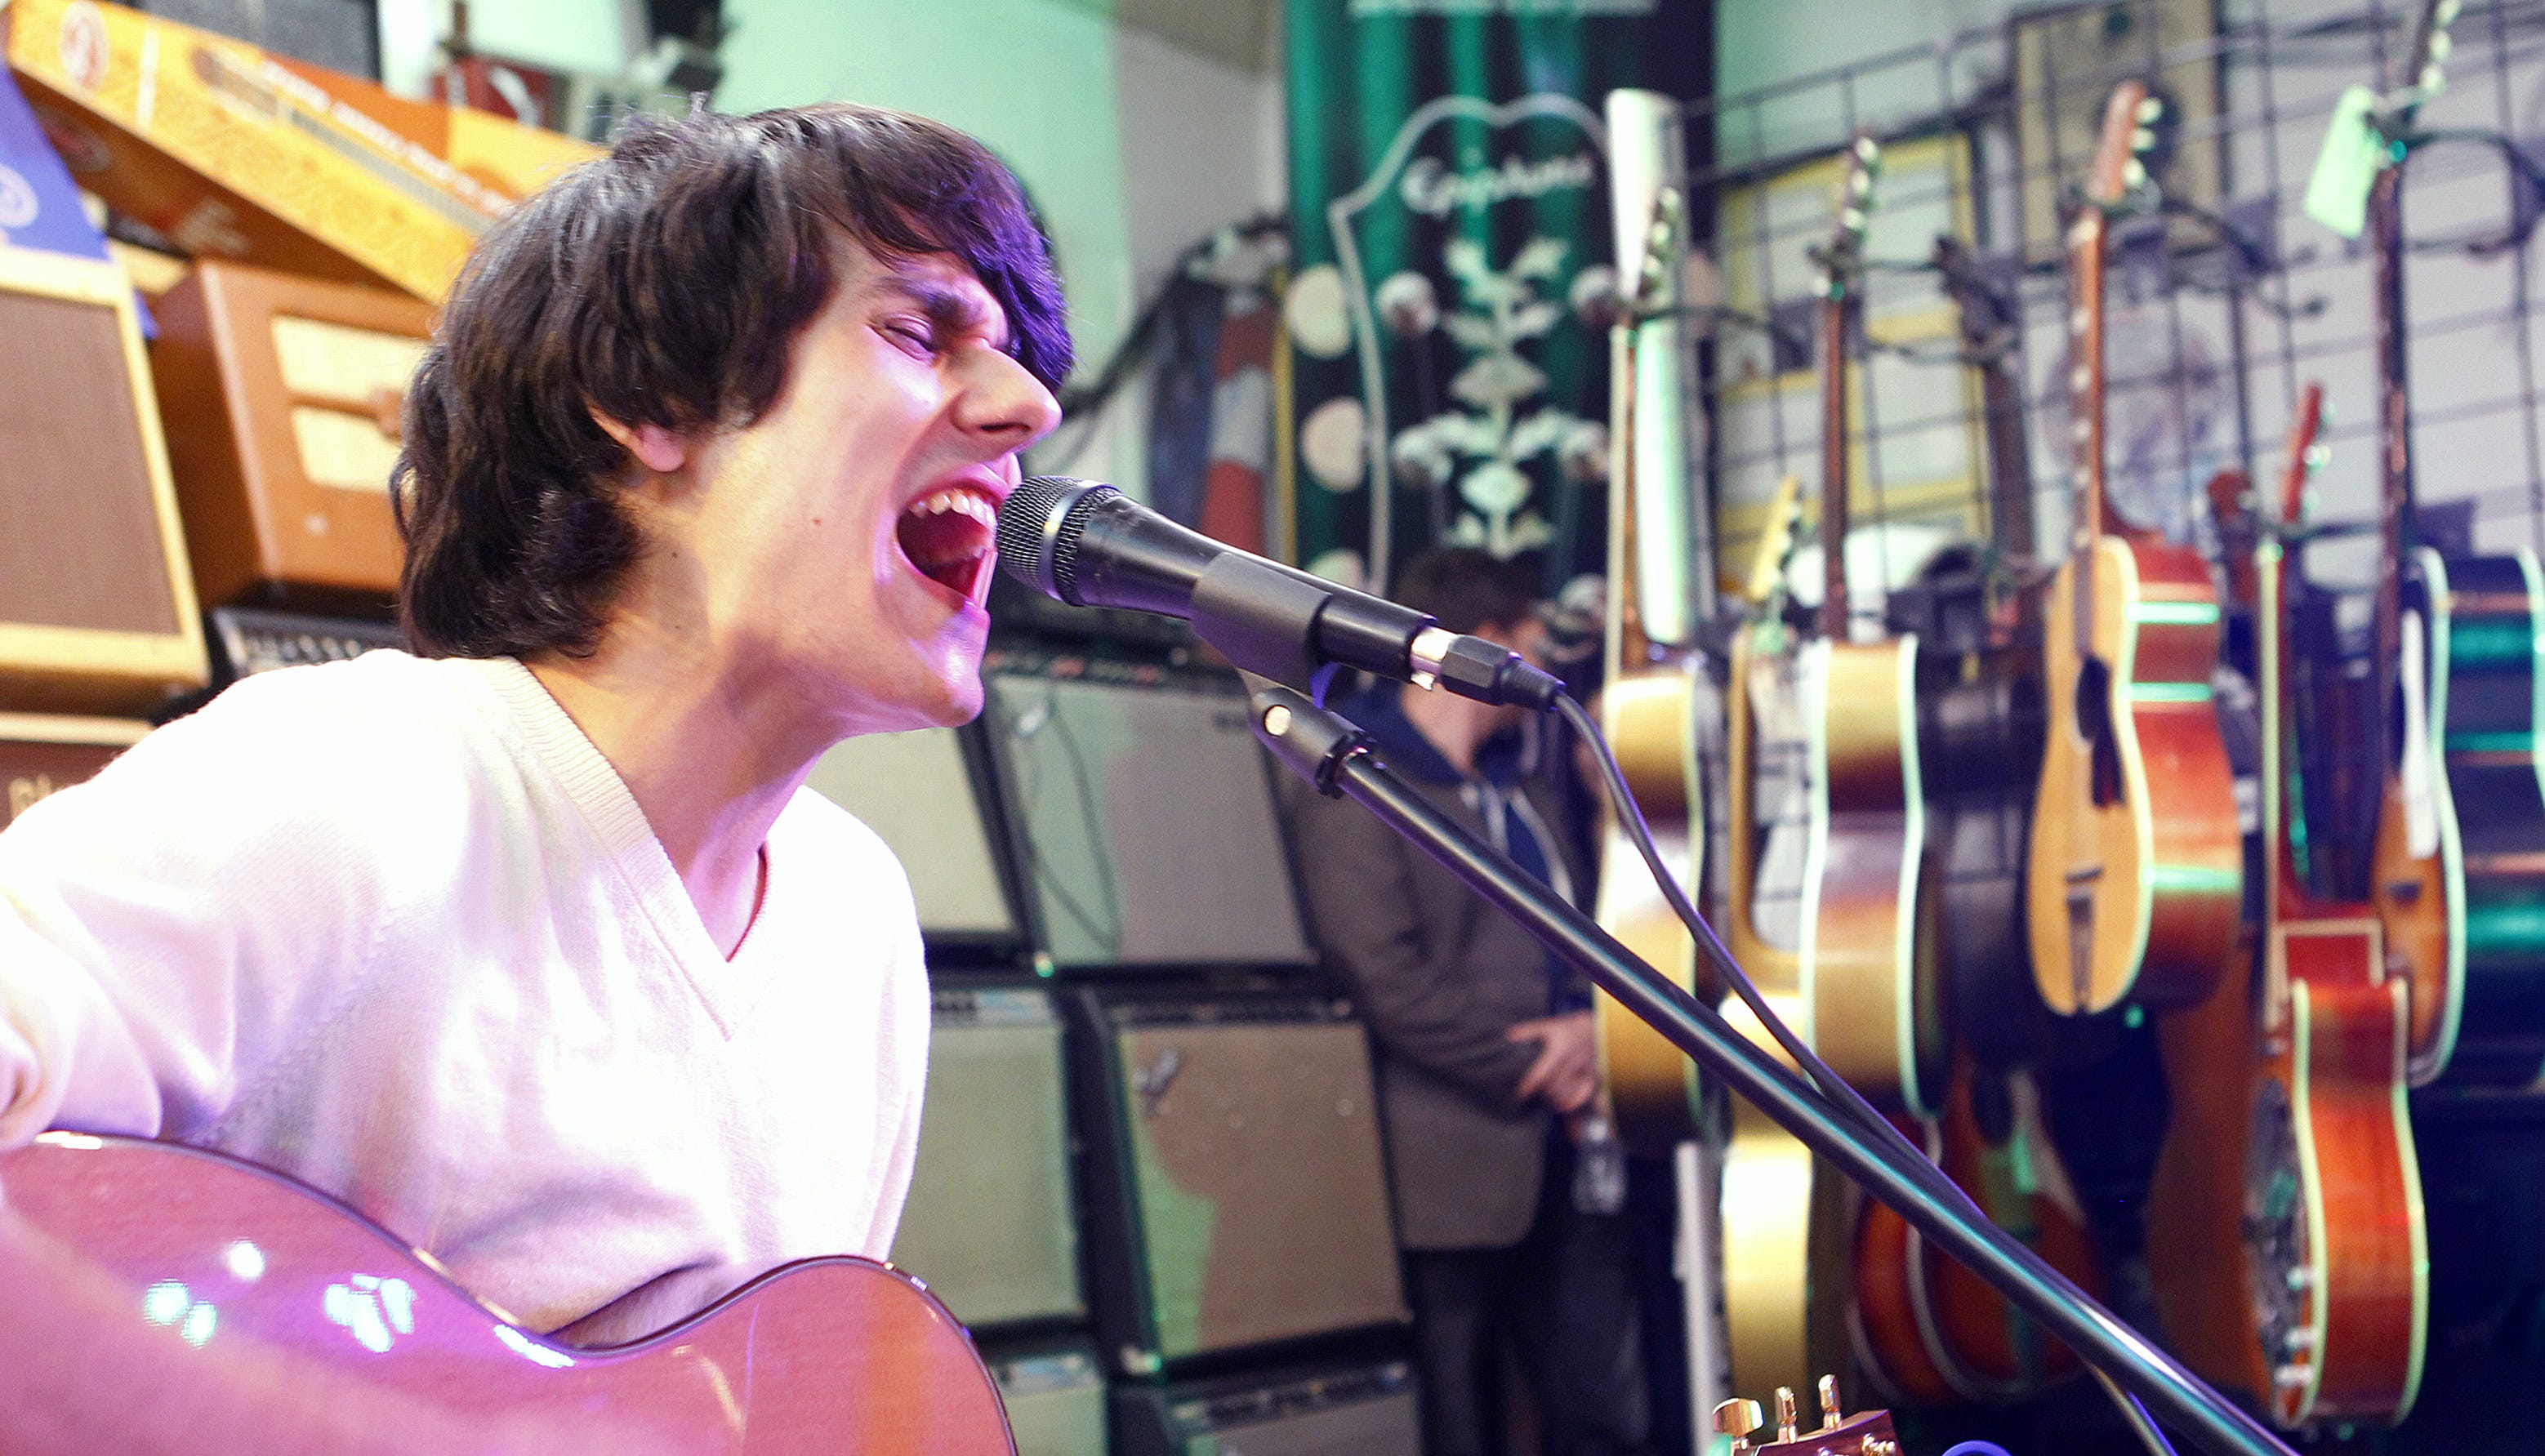 Teddy Geiger performing an in-store concert at the HOG in January 2012.